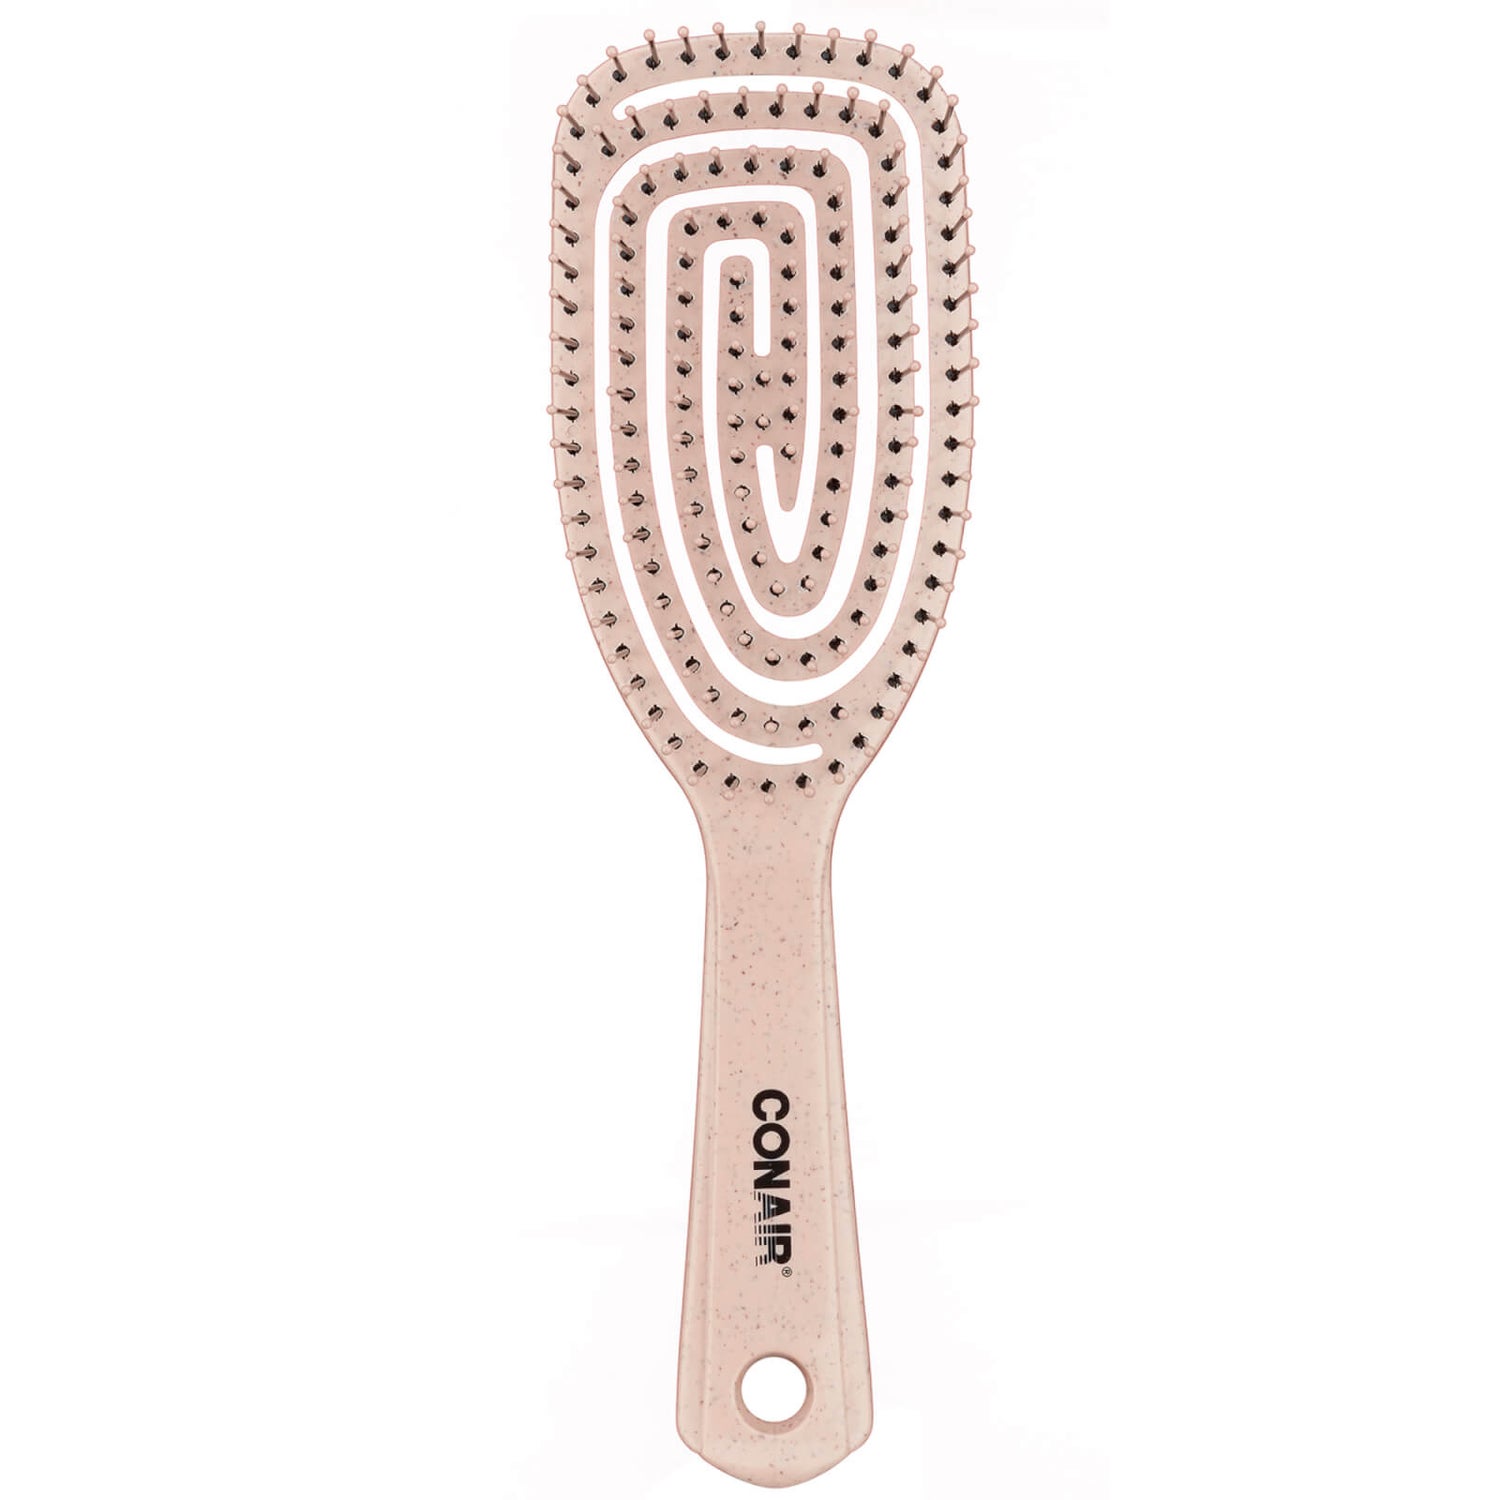 Scunci Consciously Minded Flexhead Brush